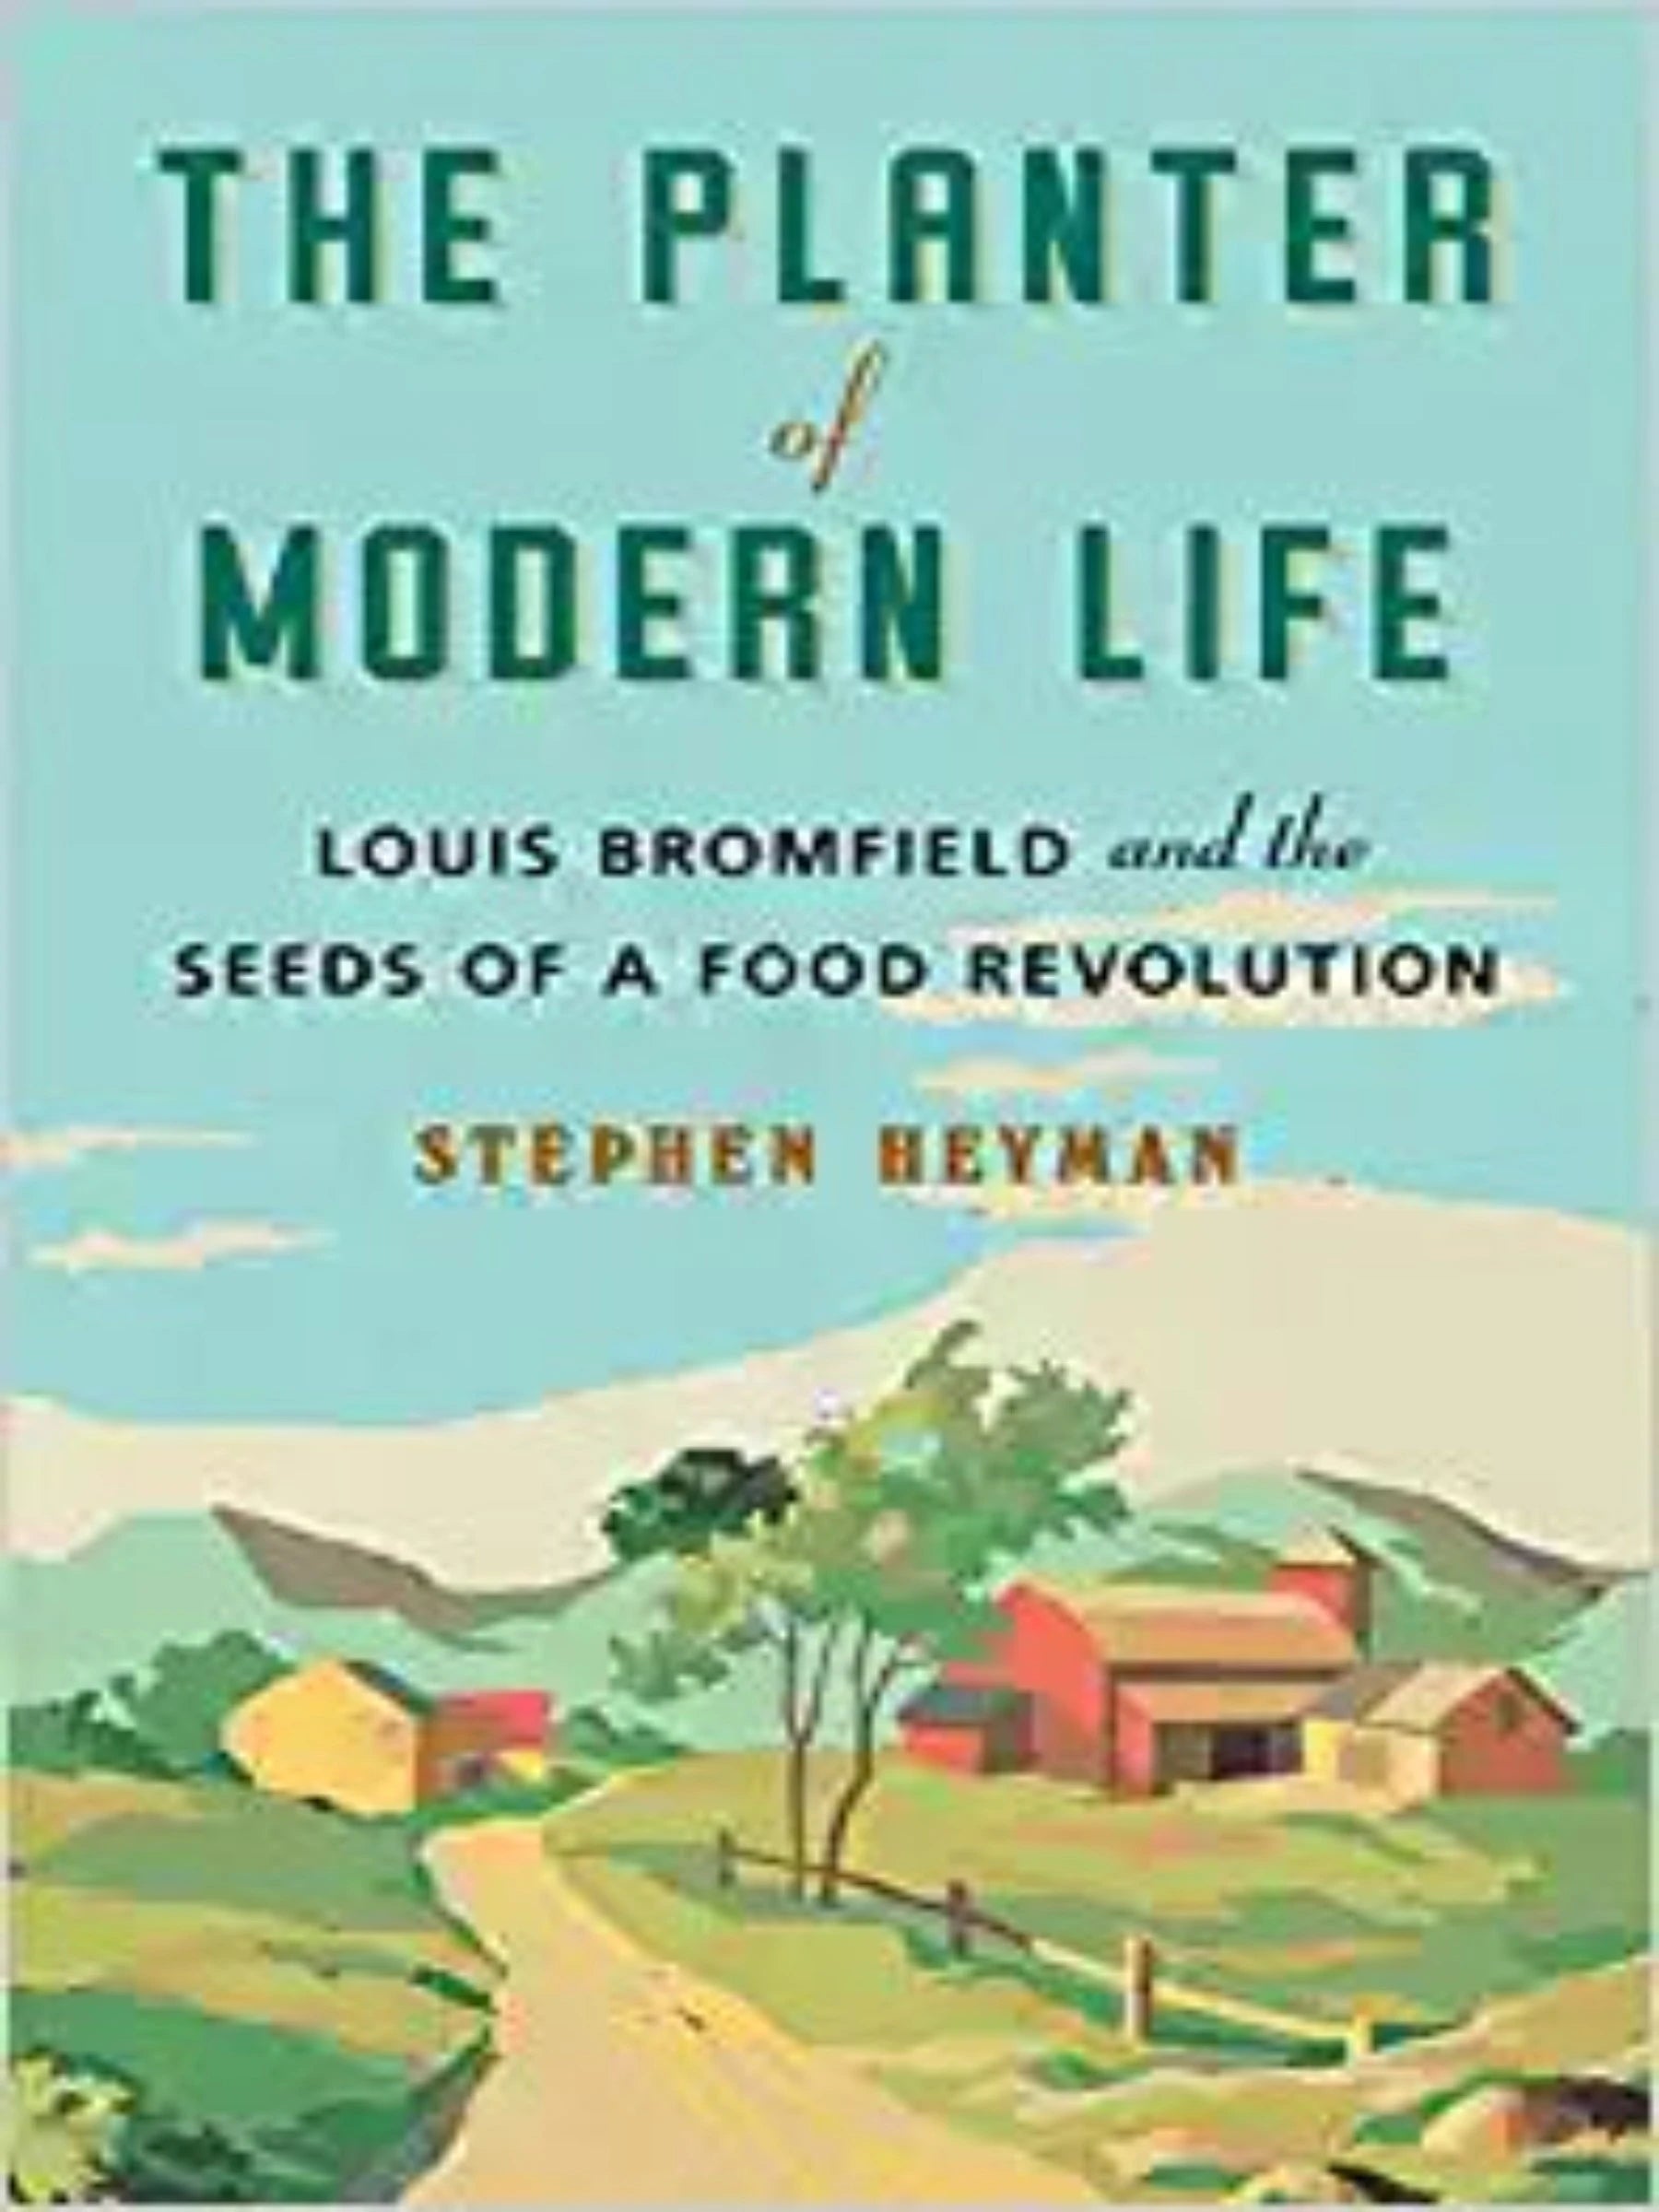 The Planter of Modern Life: Louis Bromfield and the Seeds of a Food Revolution